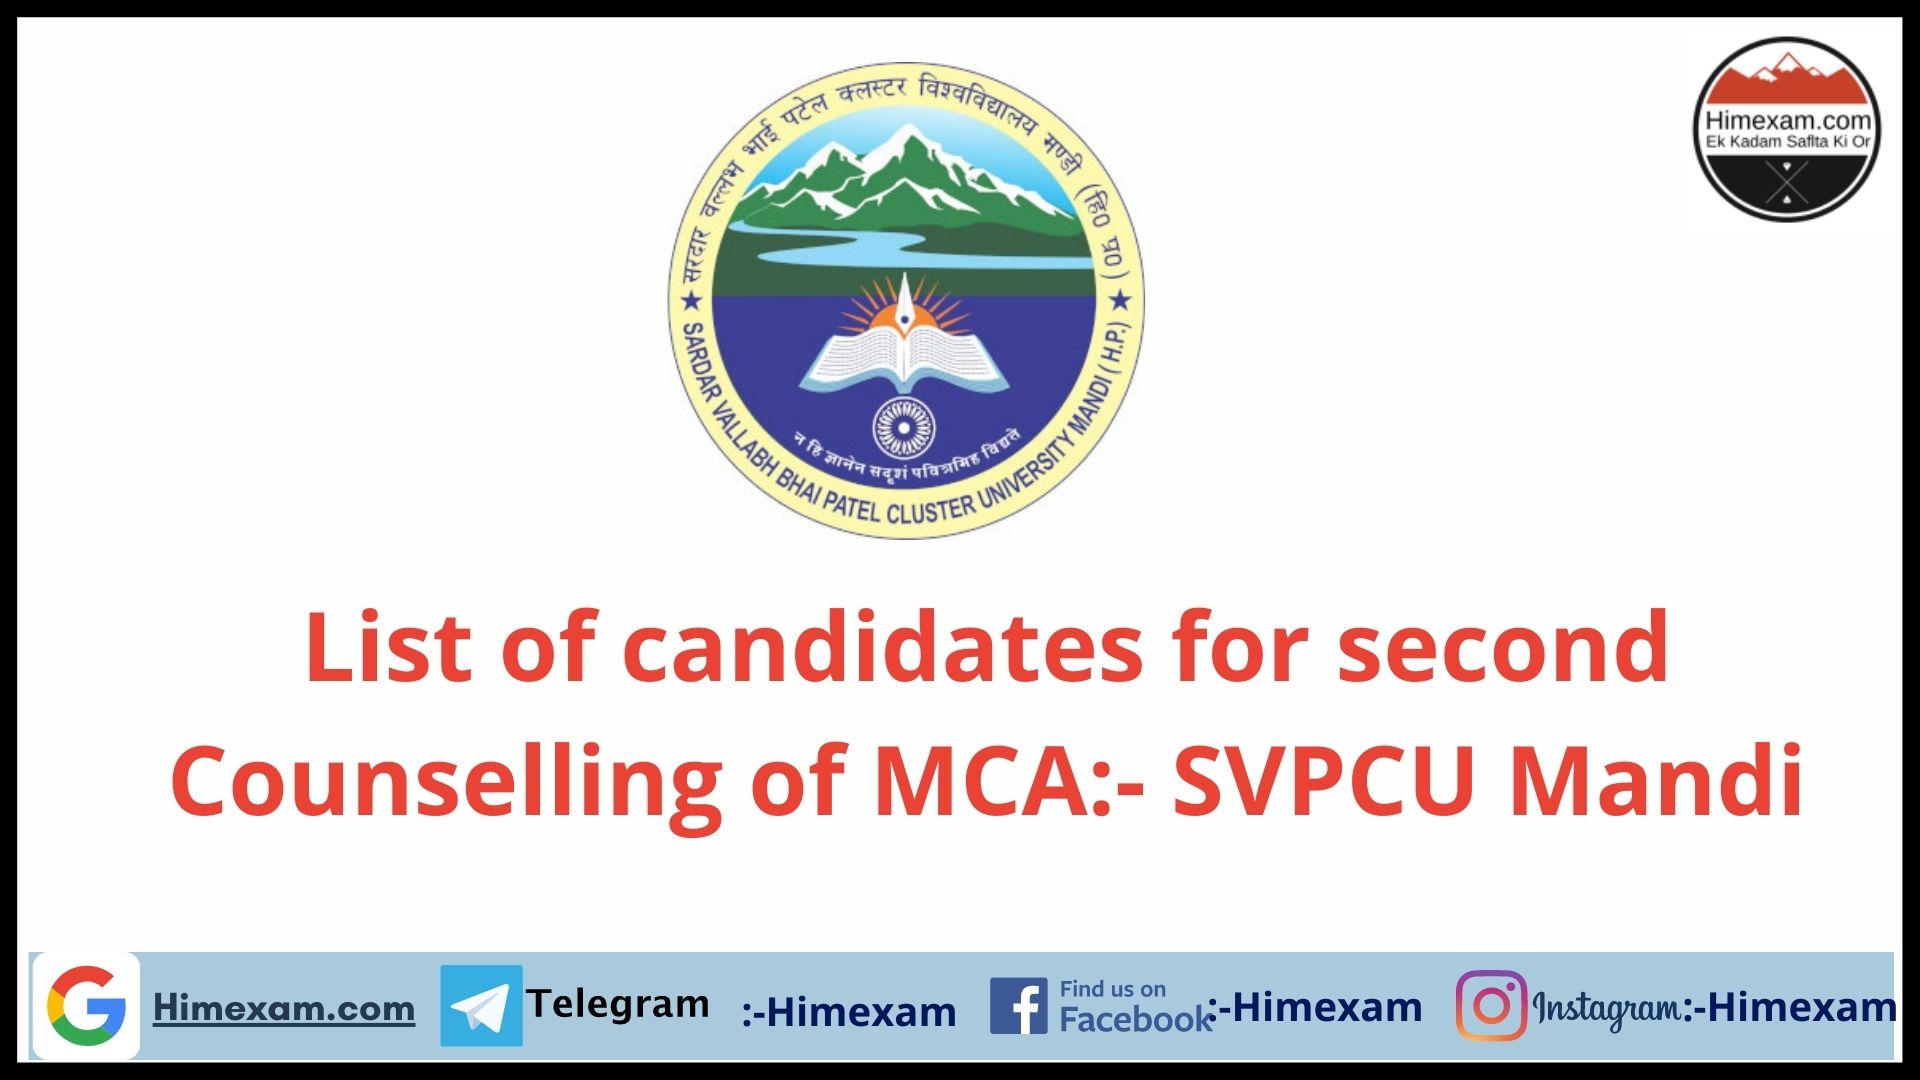 List of candidates for second Counselling of MCA:- SVPCU Mandi